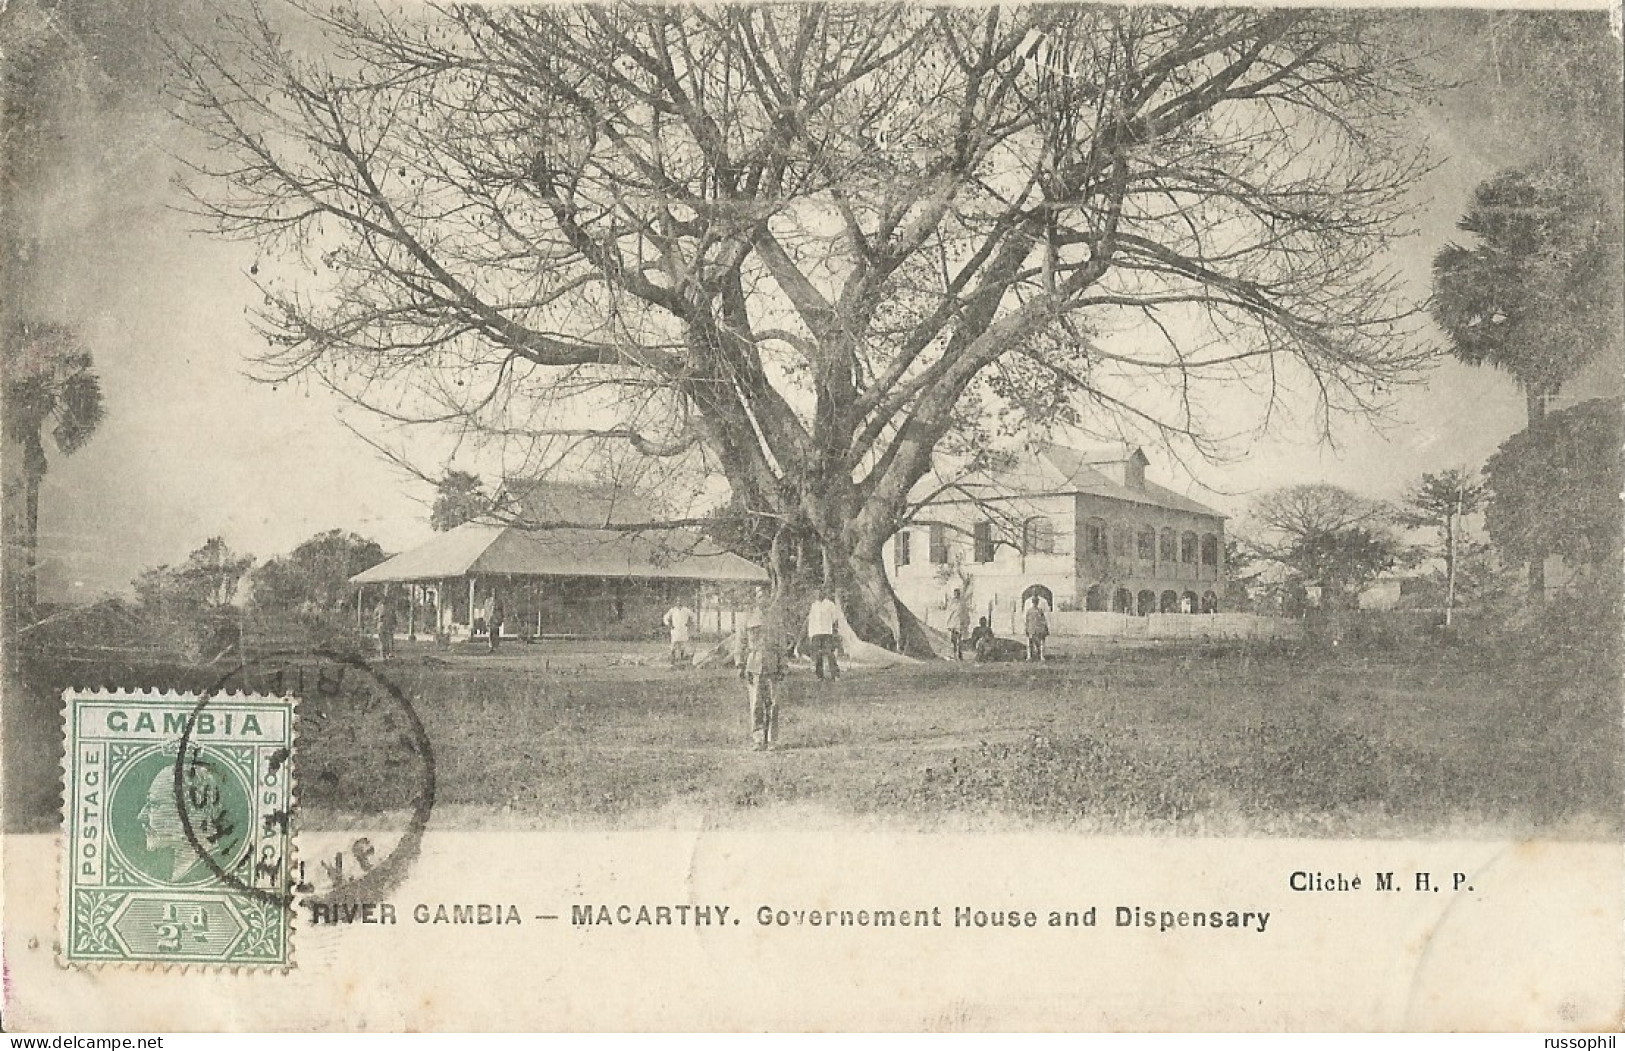 GAMBIA - RIVER GAMBIA - MACARTHY - GOVERNMENT HOUSE AND DISPENSARY - CLICHE M.H.P. - 1909 - Gambie